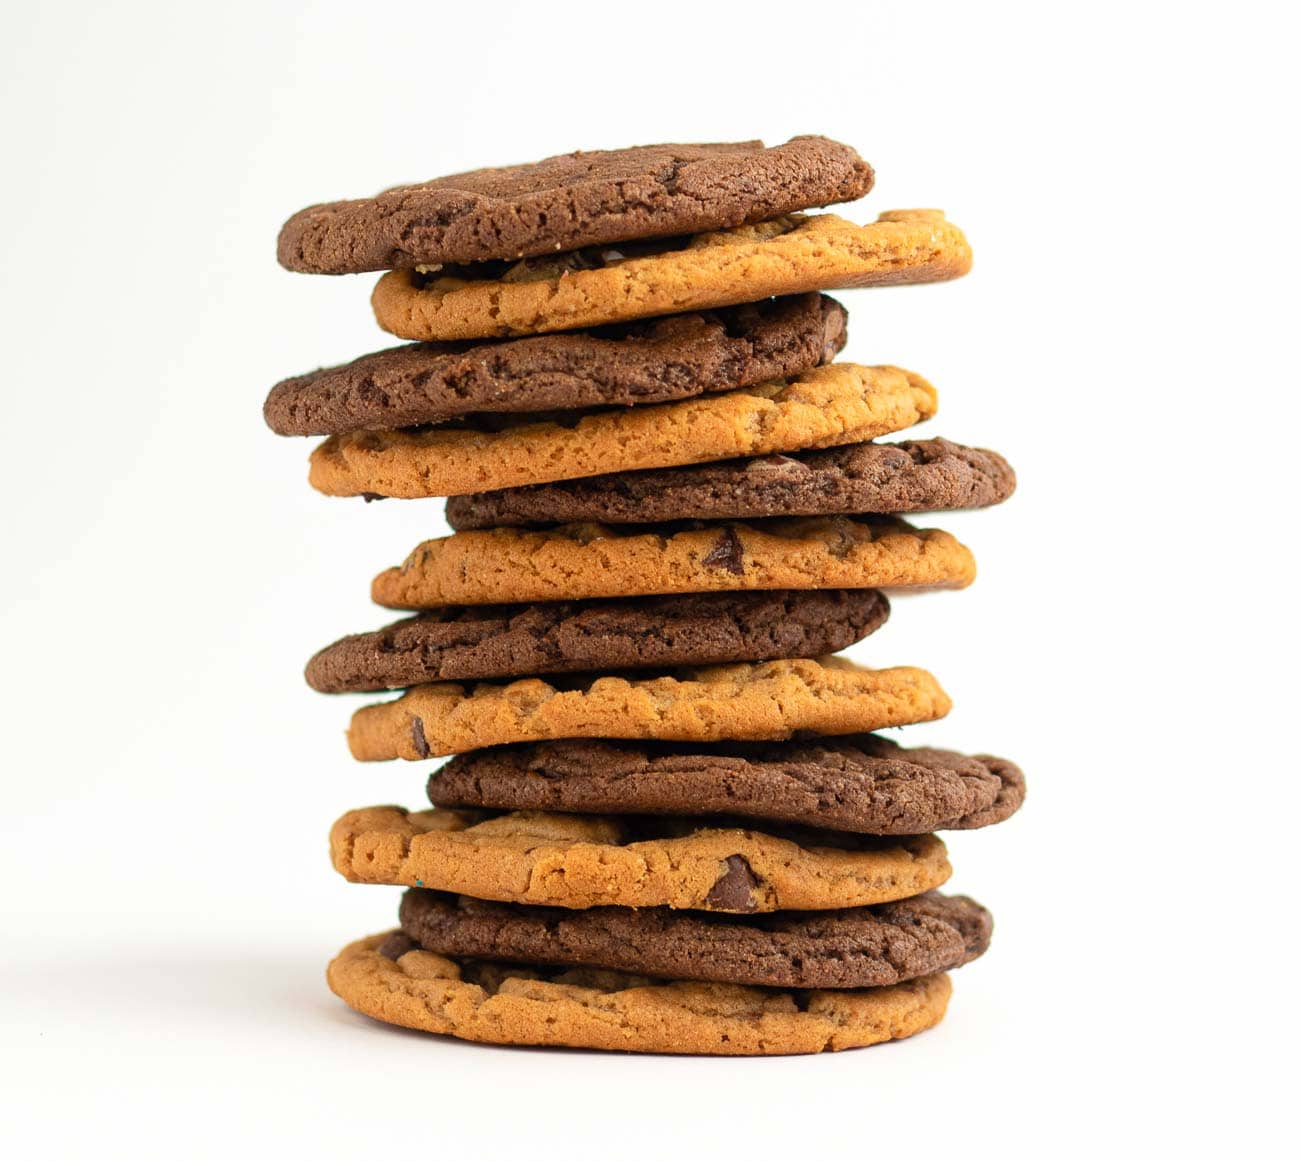 Picture of a dozen of Double fudge and Original chocolate chip cookies alternately stacked on top of each other